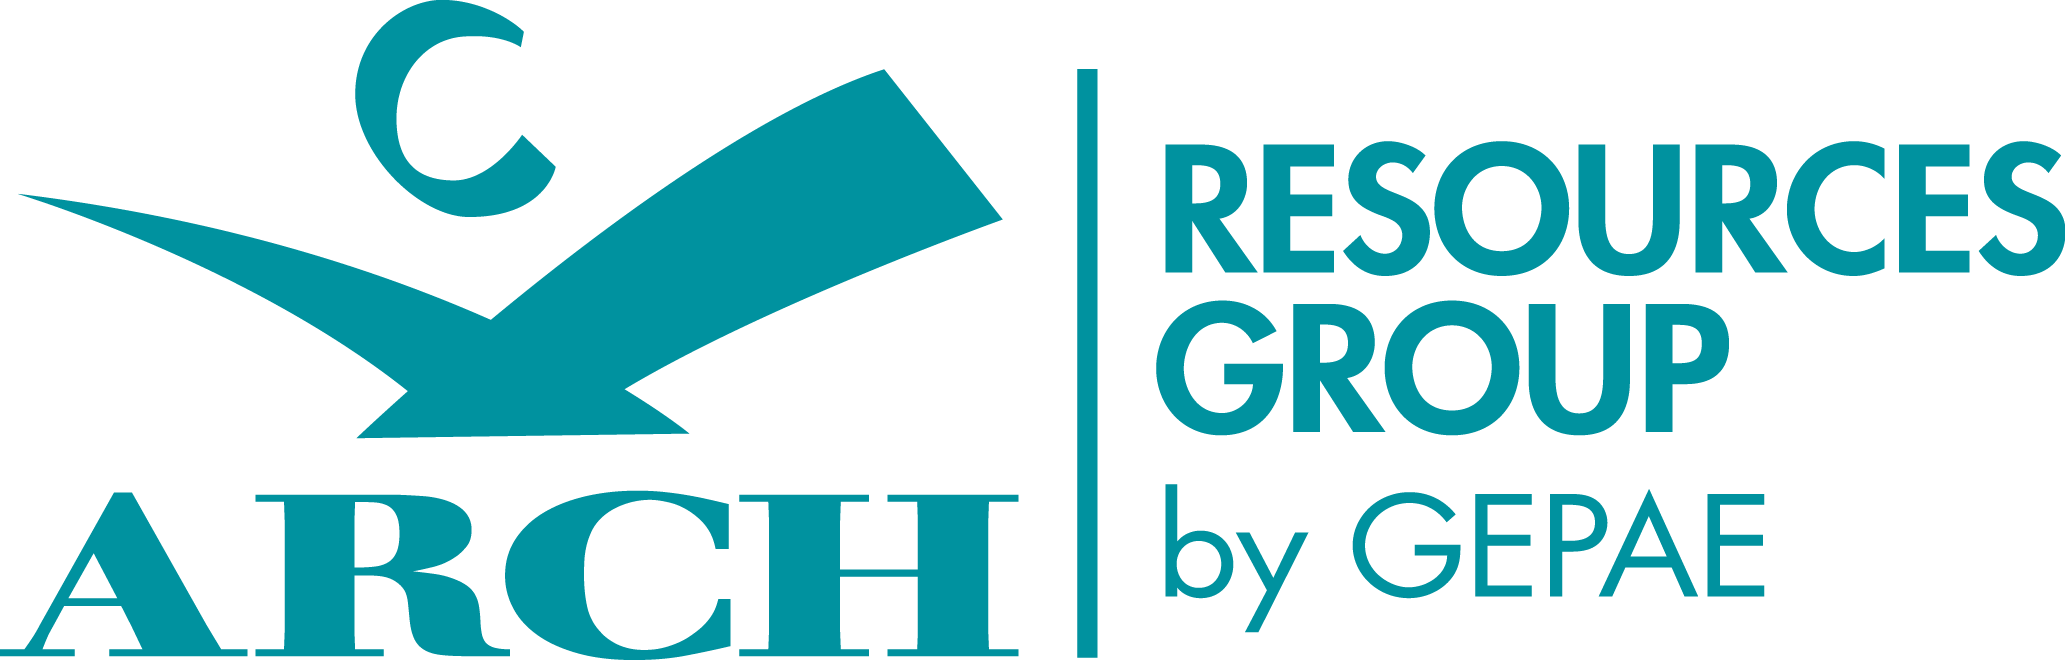 Arch Resource Group